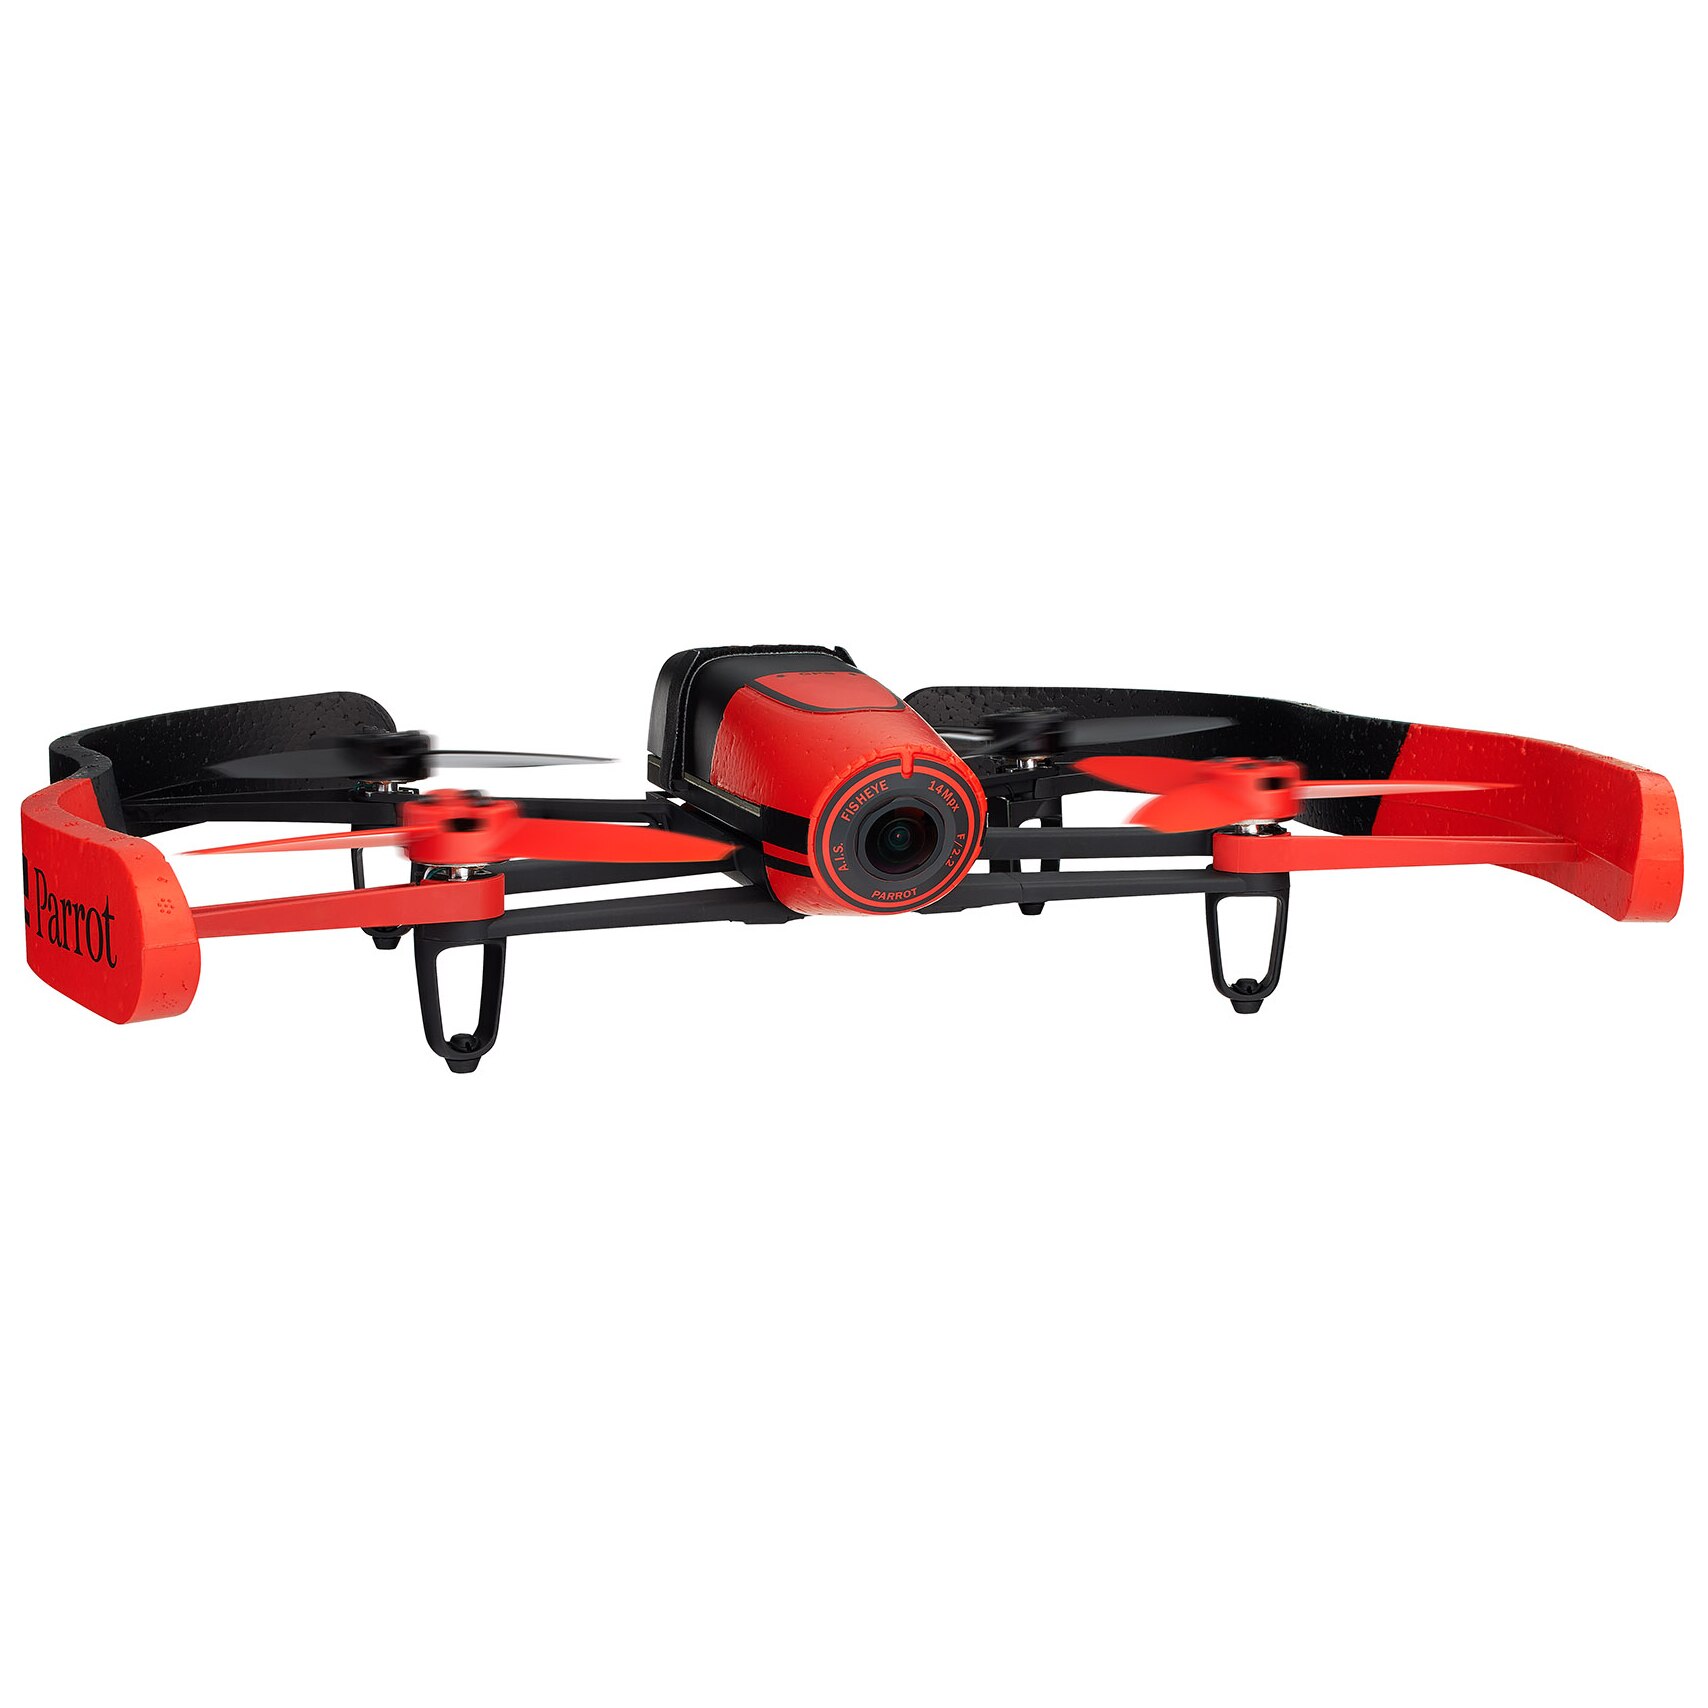 Inferior Europe heroin Drona Parrot Bebop Drone, Red - eMAG.ro